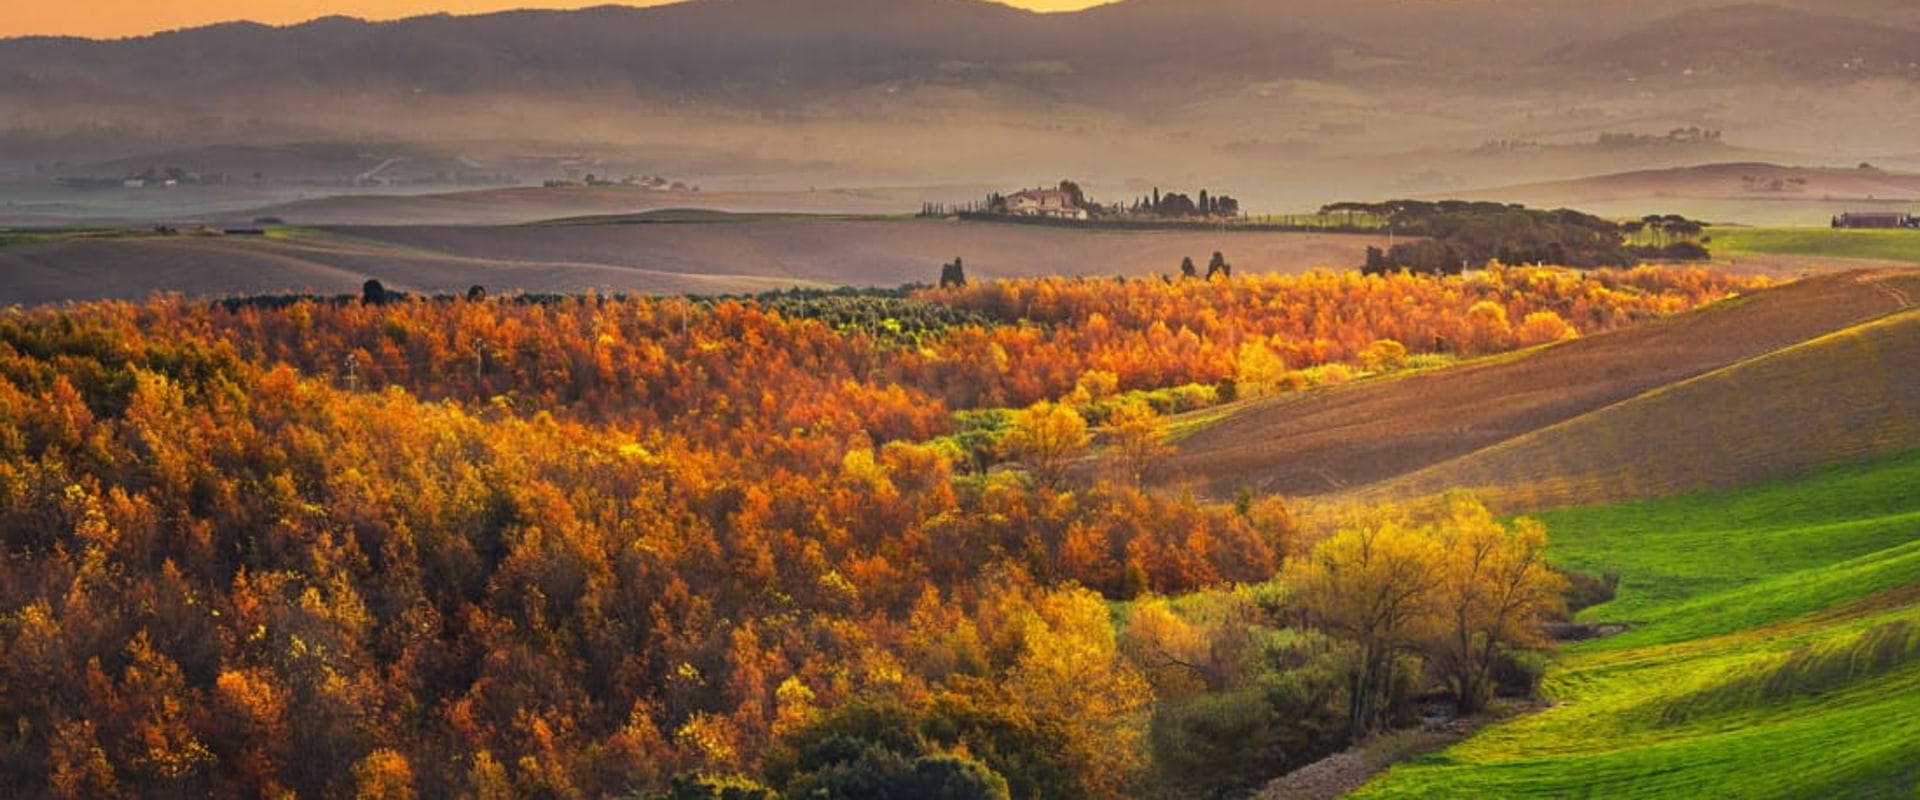 The Best Places to Visit in Italy in October